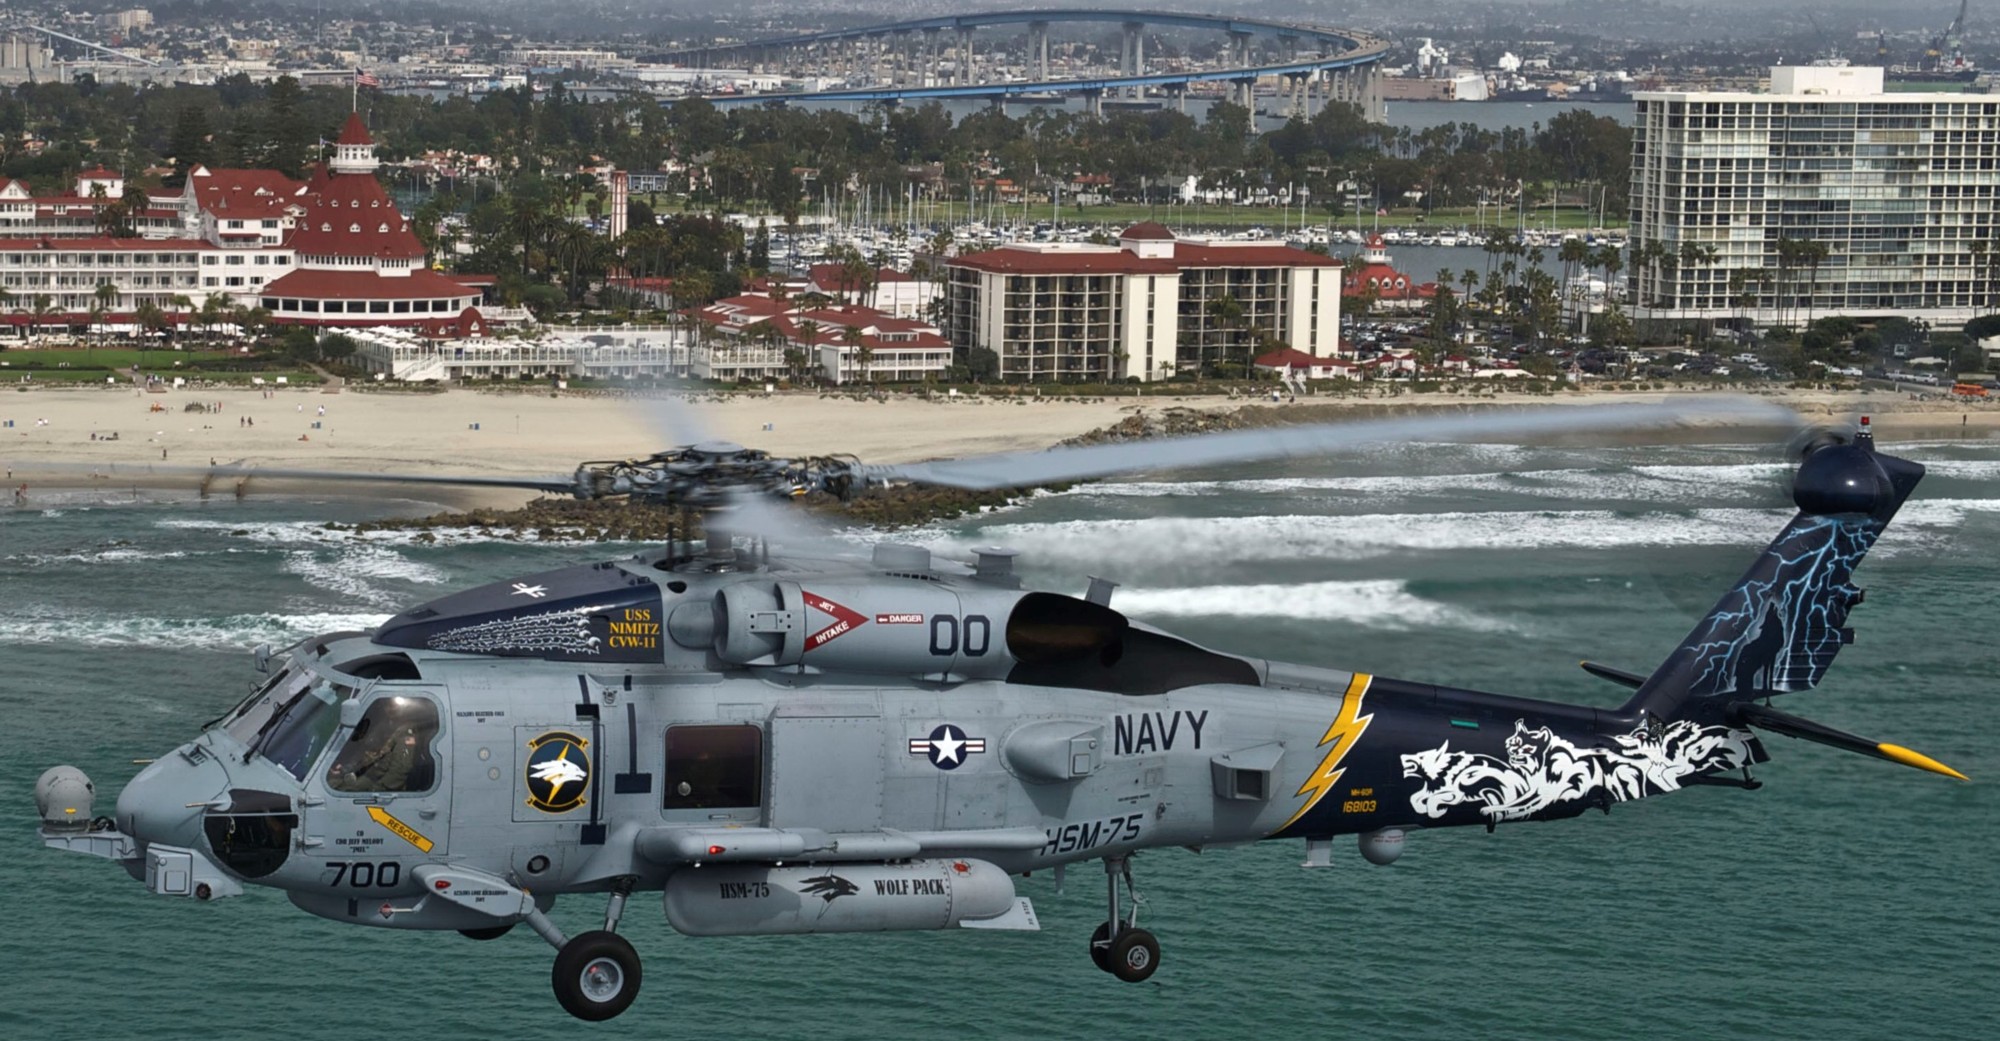 hsm-75 wolf pack helicopter maritime strike squadron mh-60r seahawk nas north island california cvw-11 14x